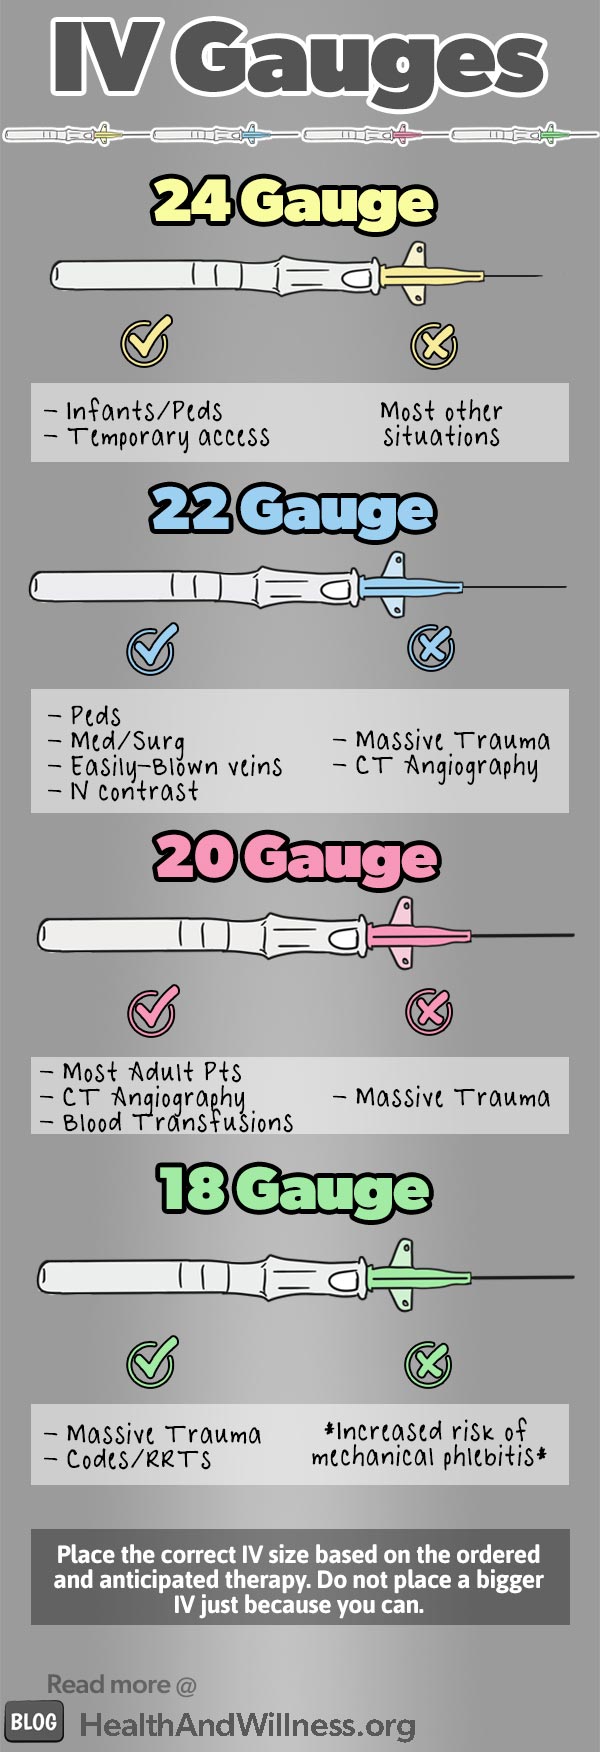 An Overview of the different IV gauges and which scenarios they can be used for! #ER #IV #Nursing